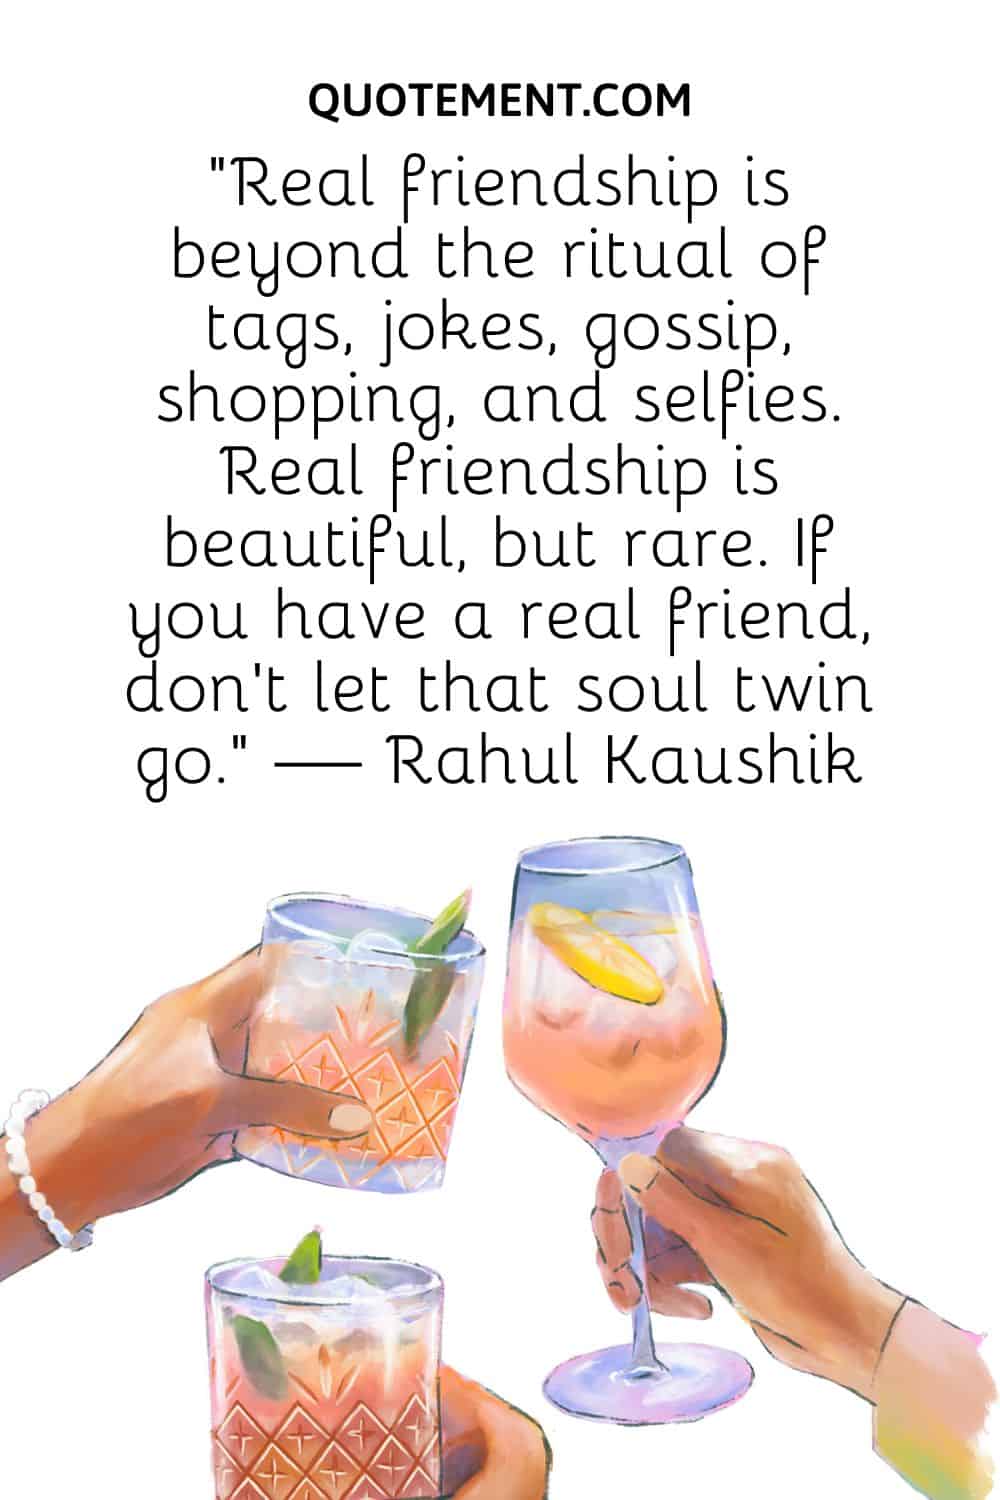 Real friendship is beyond the ritual of tags, jokes, gossip, shopping, and selfies.